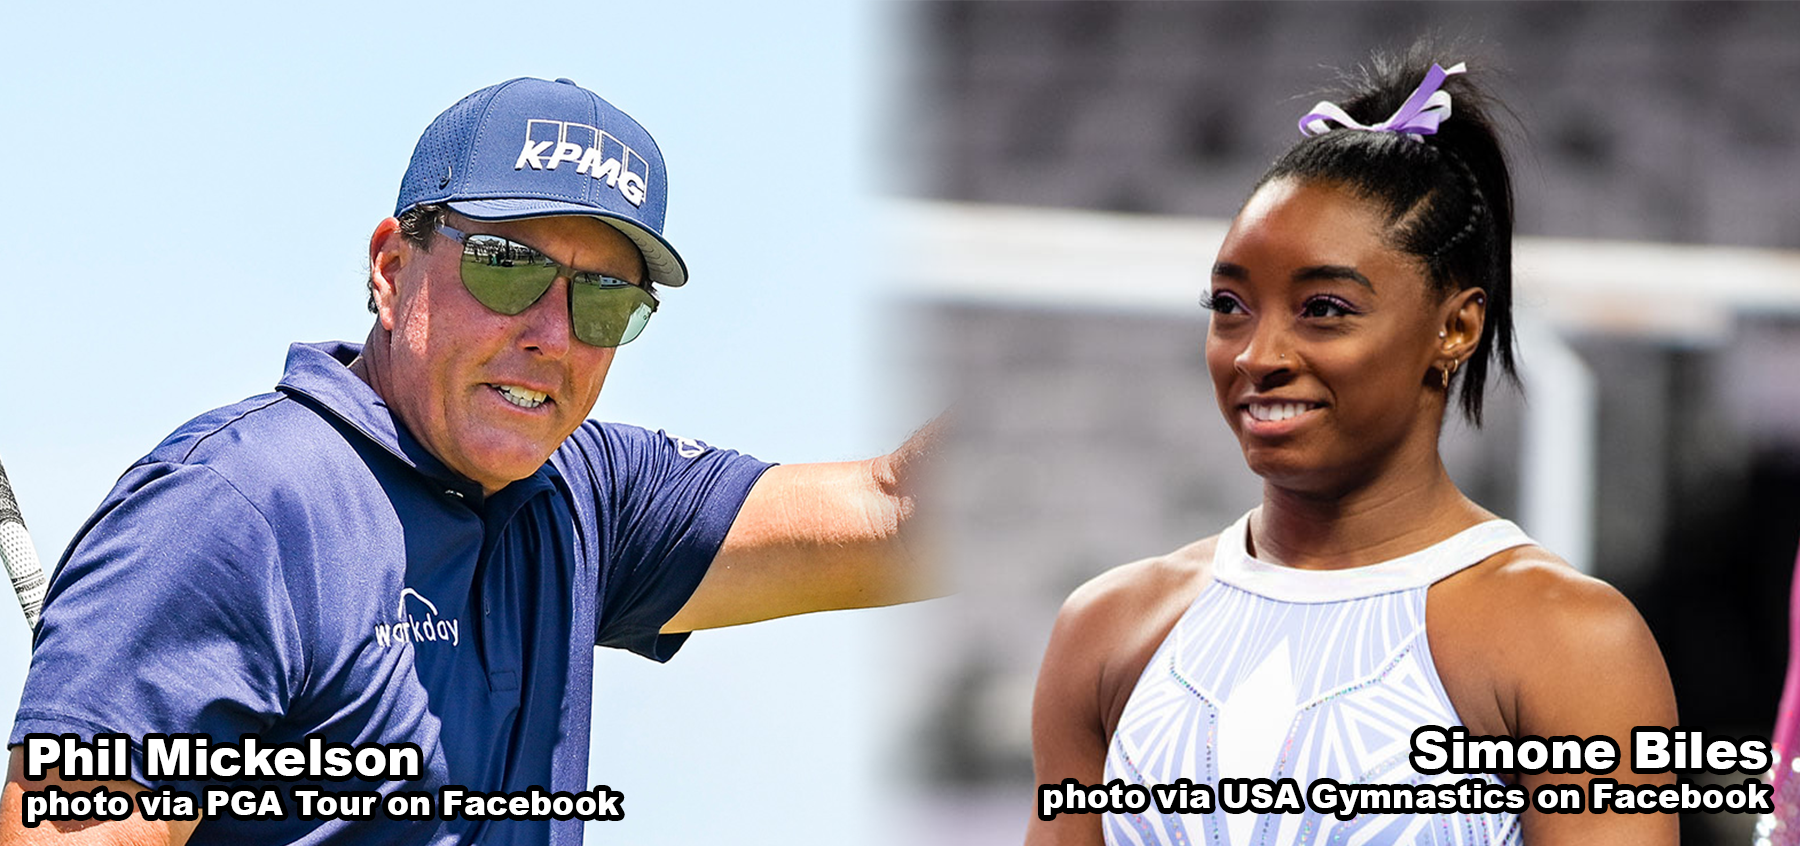 Phil Mickelson and Simone Biles